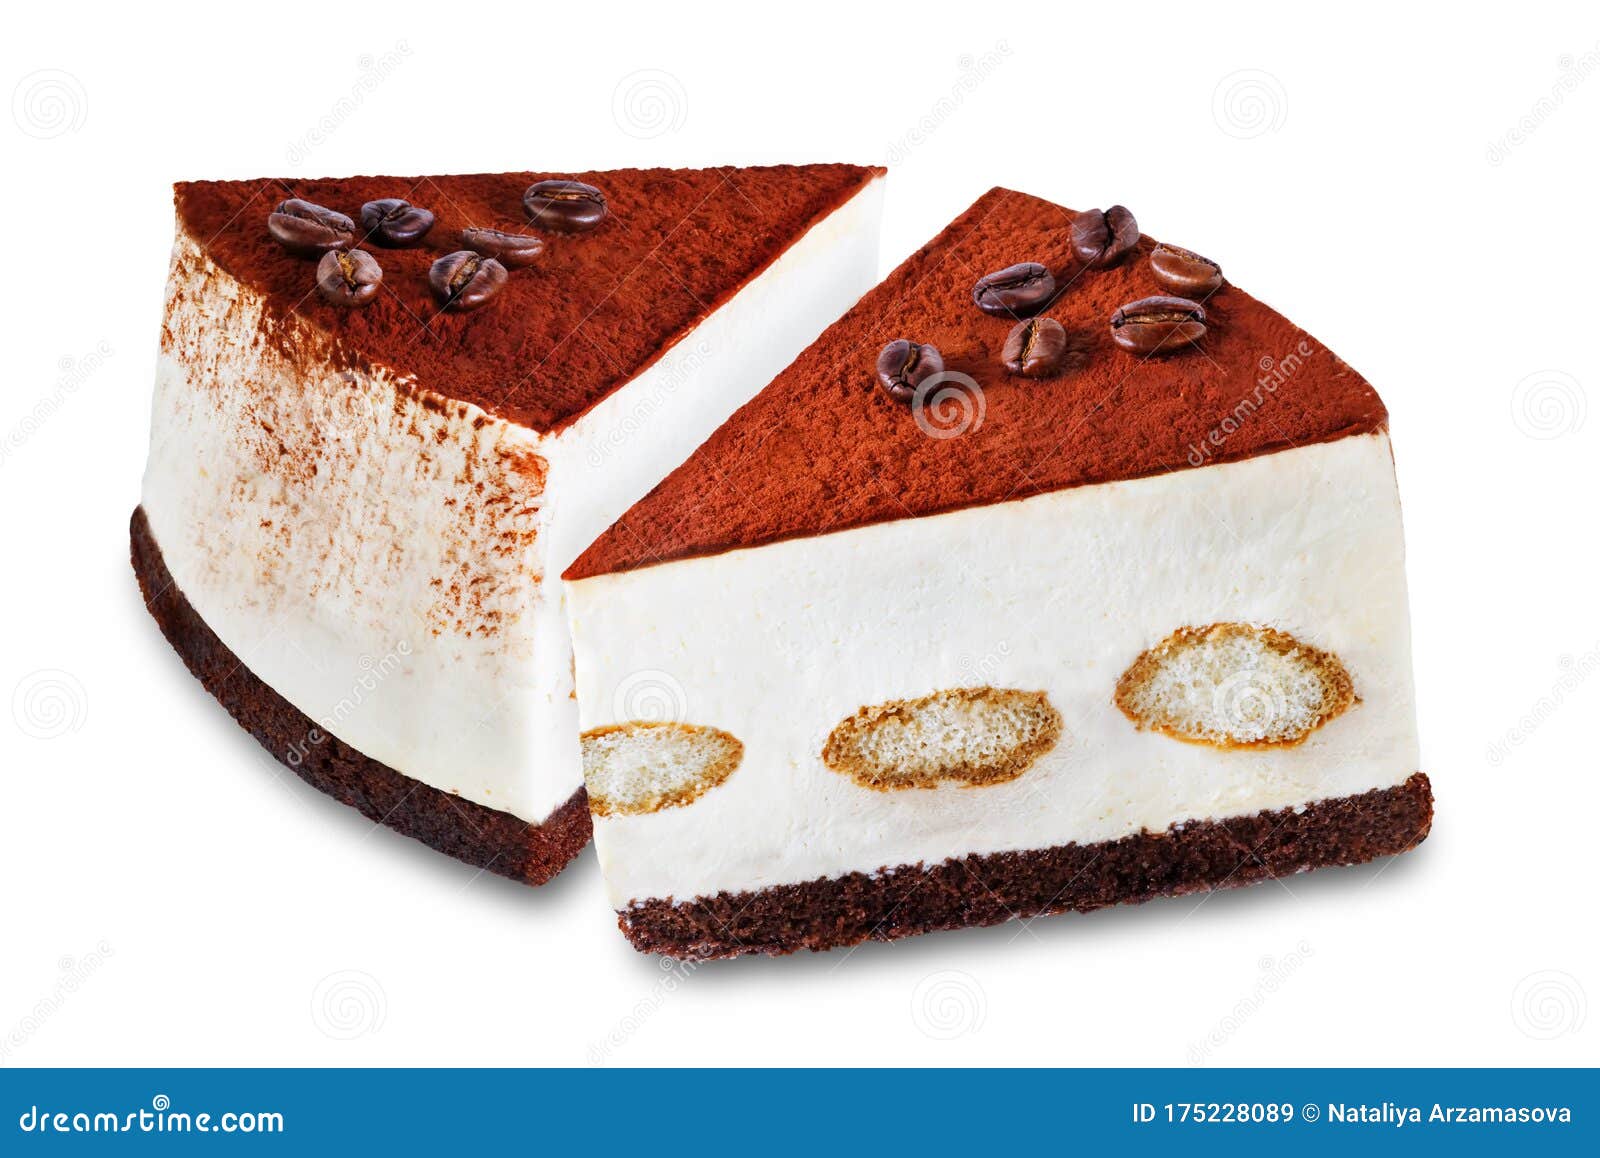 Tiramisu Cake Decorated With Coffee Beans On A White Isolated Background Stock Image Image Of Dessert Delicious